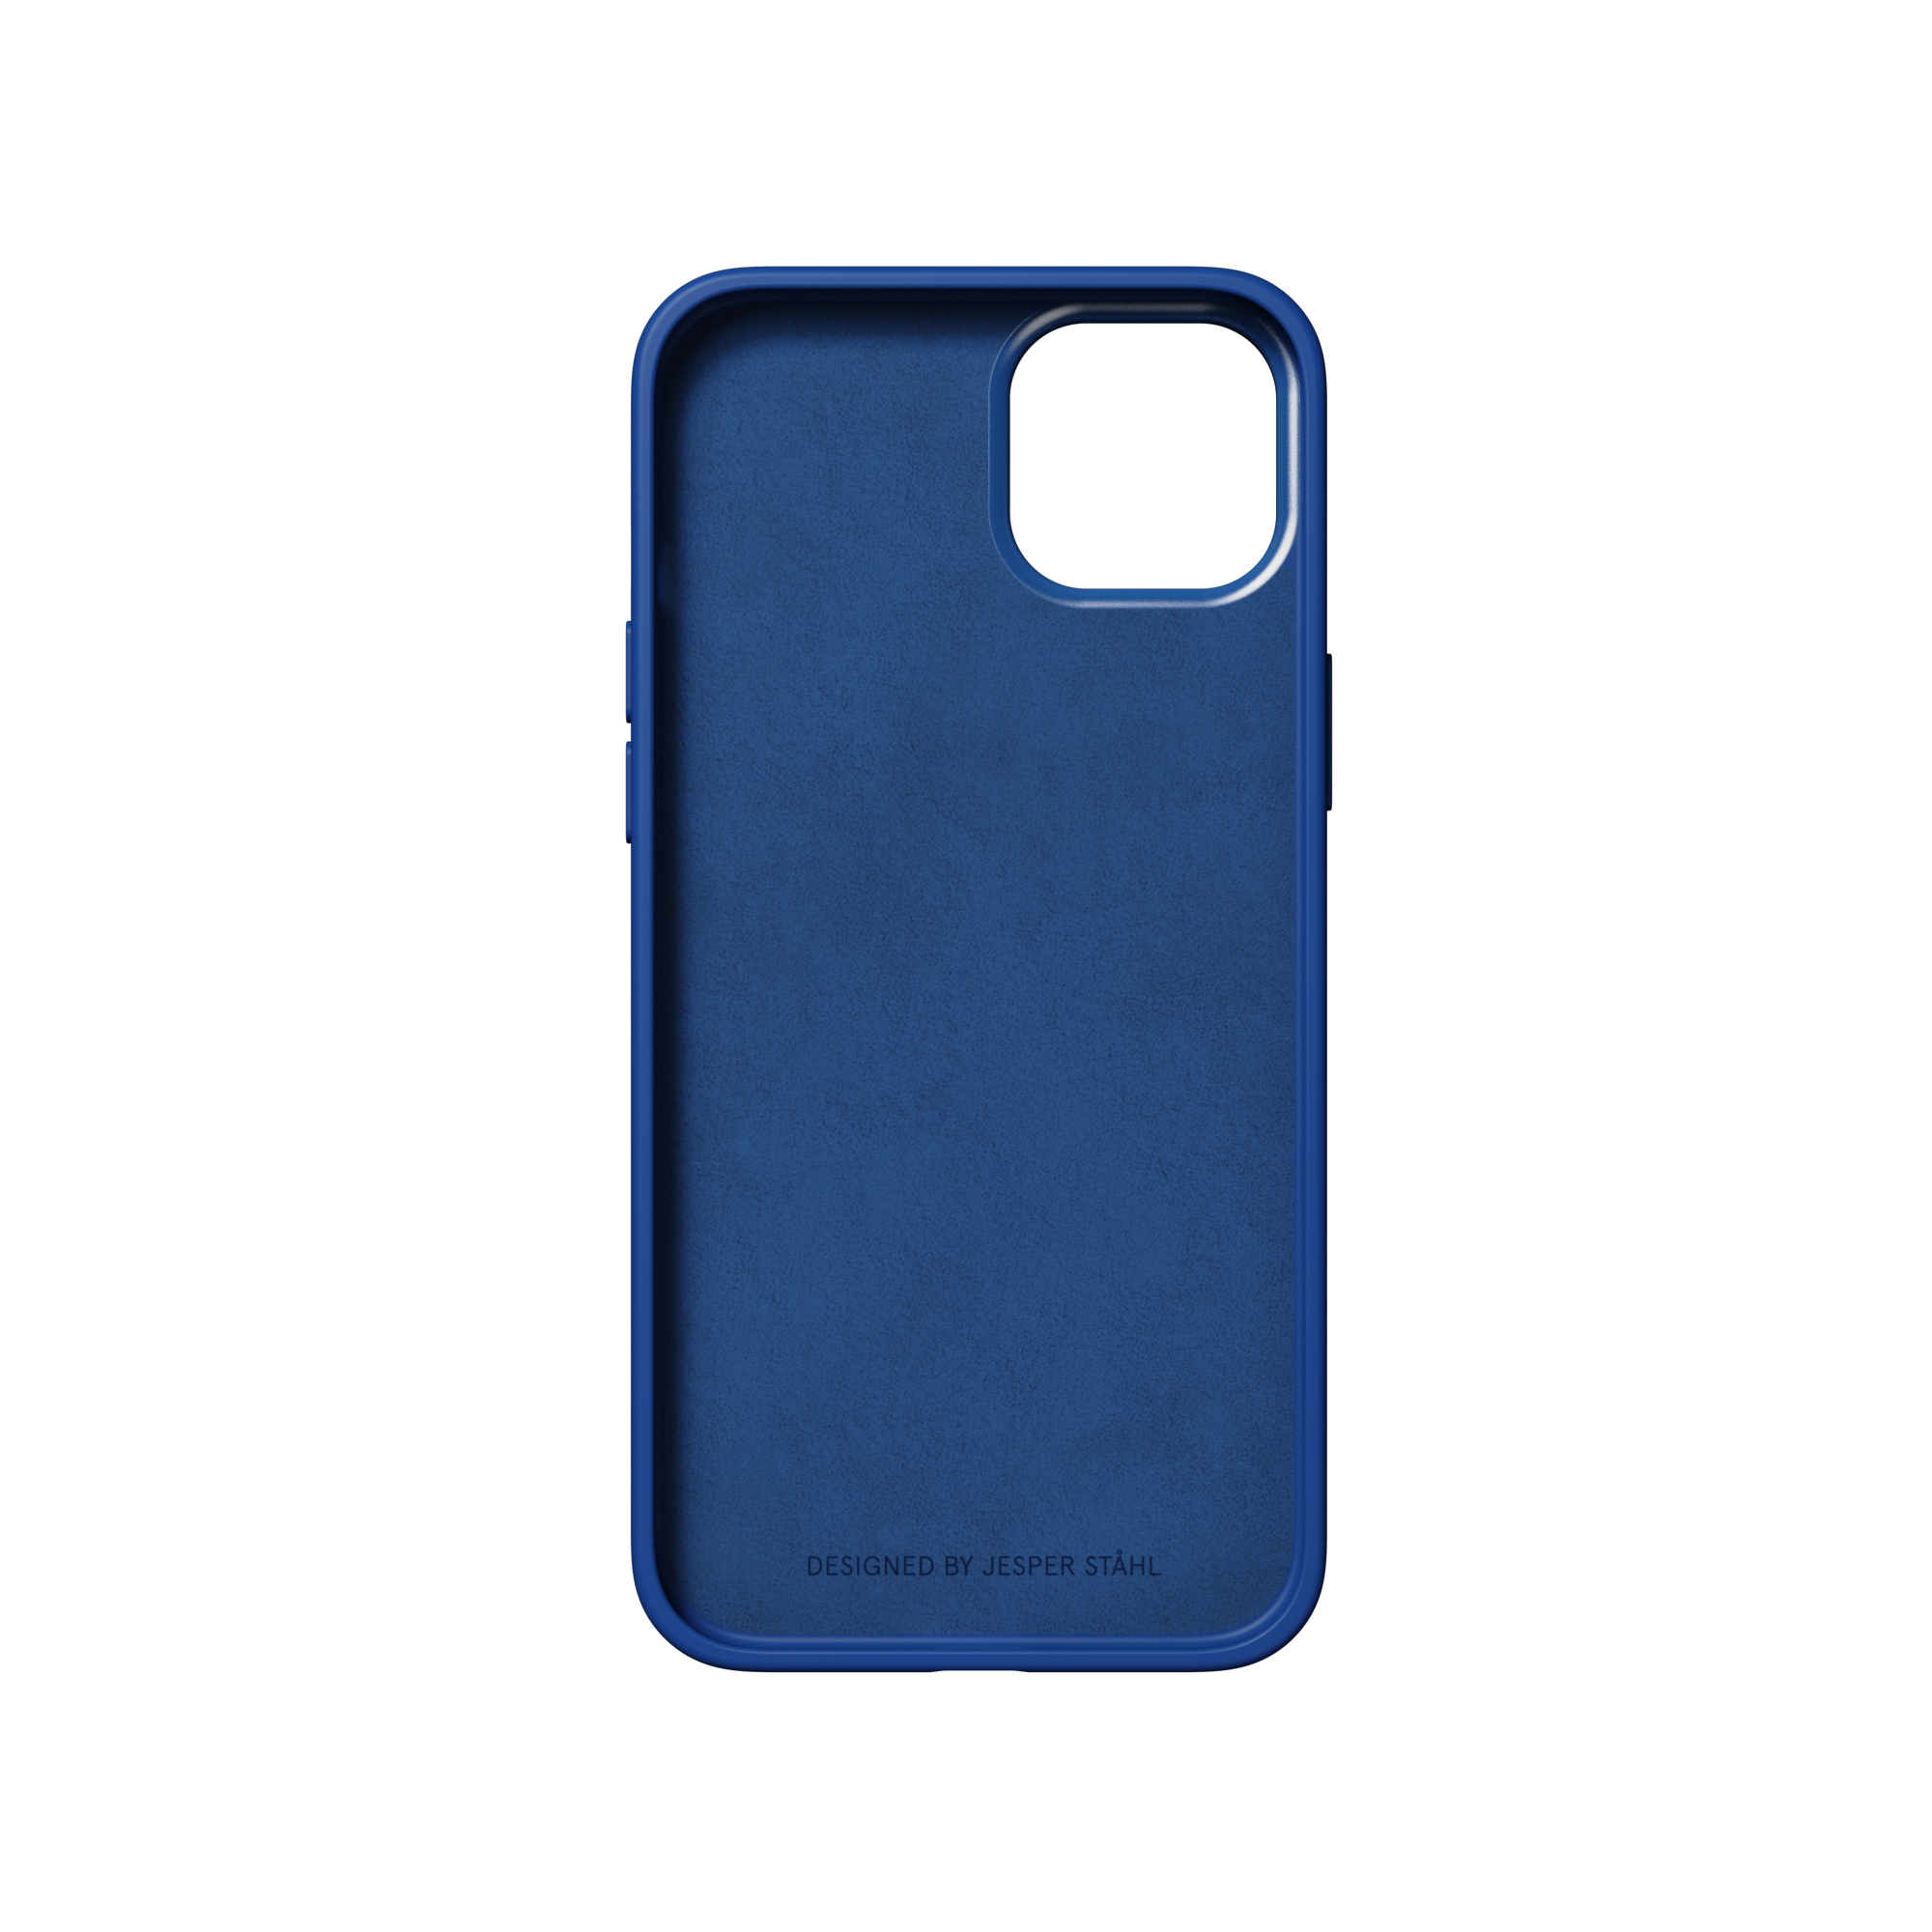 APPLE, Bold, MAX, NUDIENT BLUE 15 Backcover, PRO IPHONE